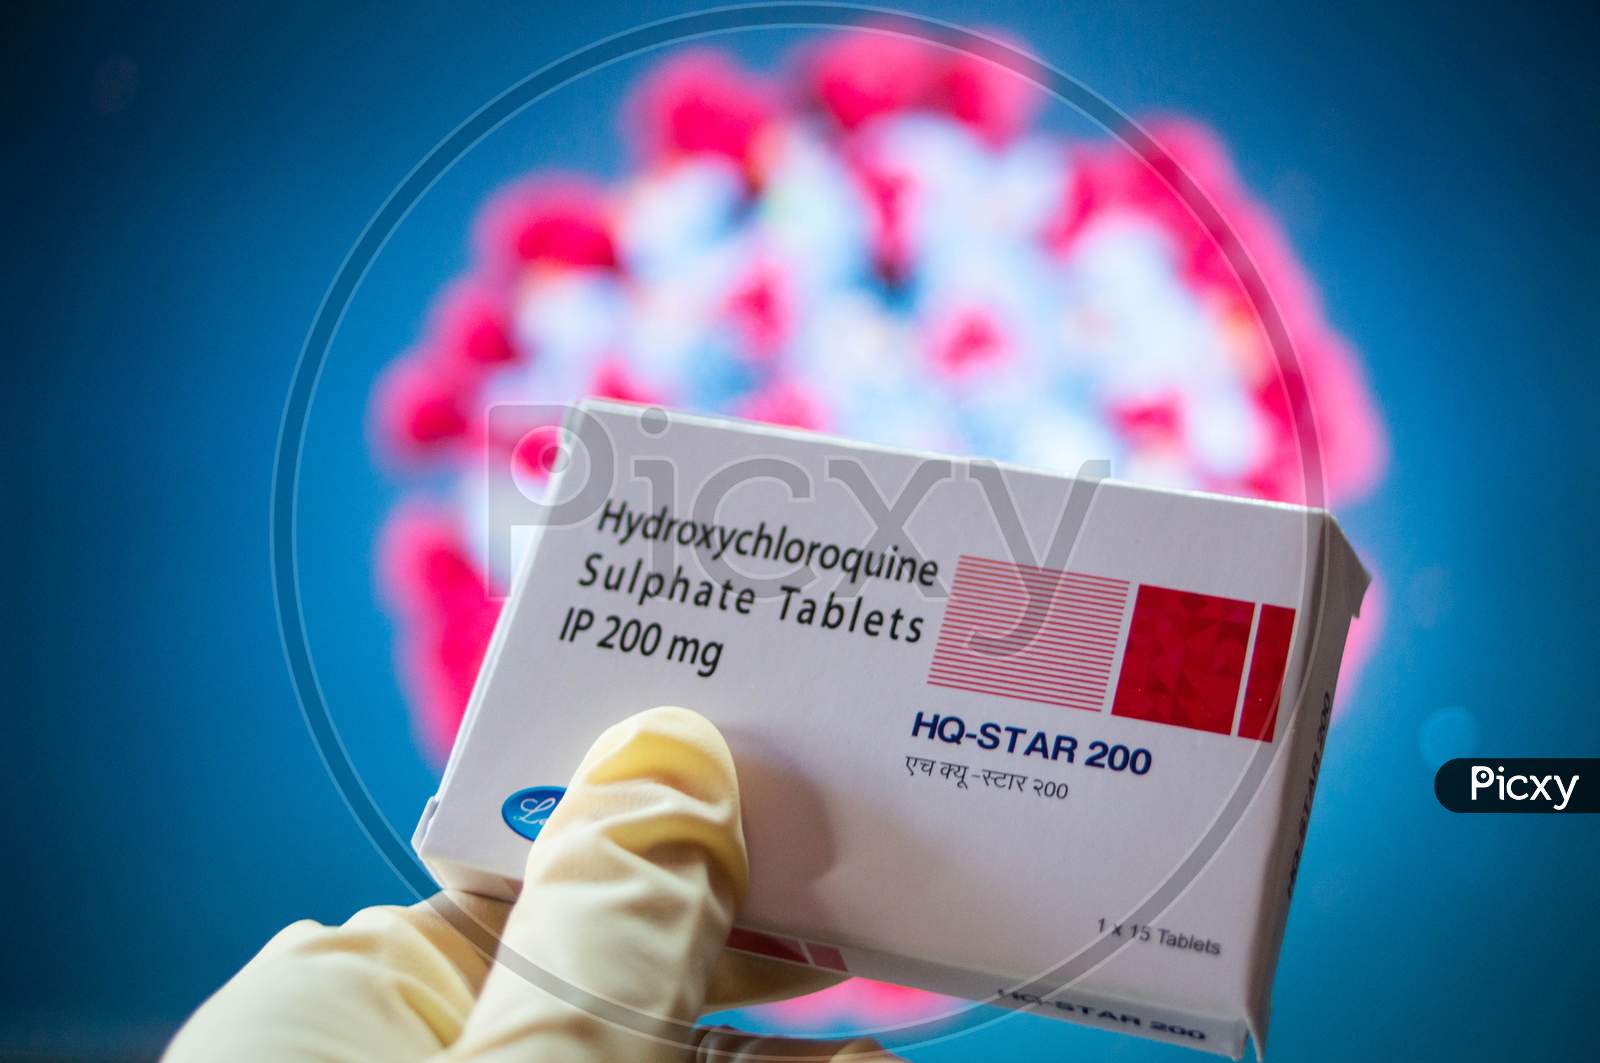 Hydroxychloroquine Sulphate Tablets With Coronavirus Symbol In Background